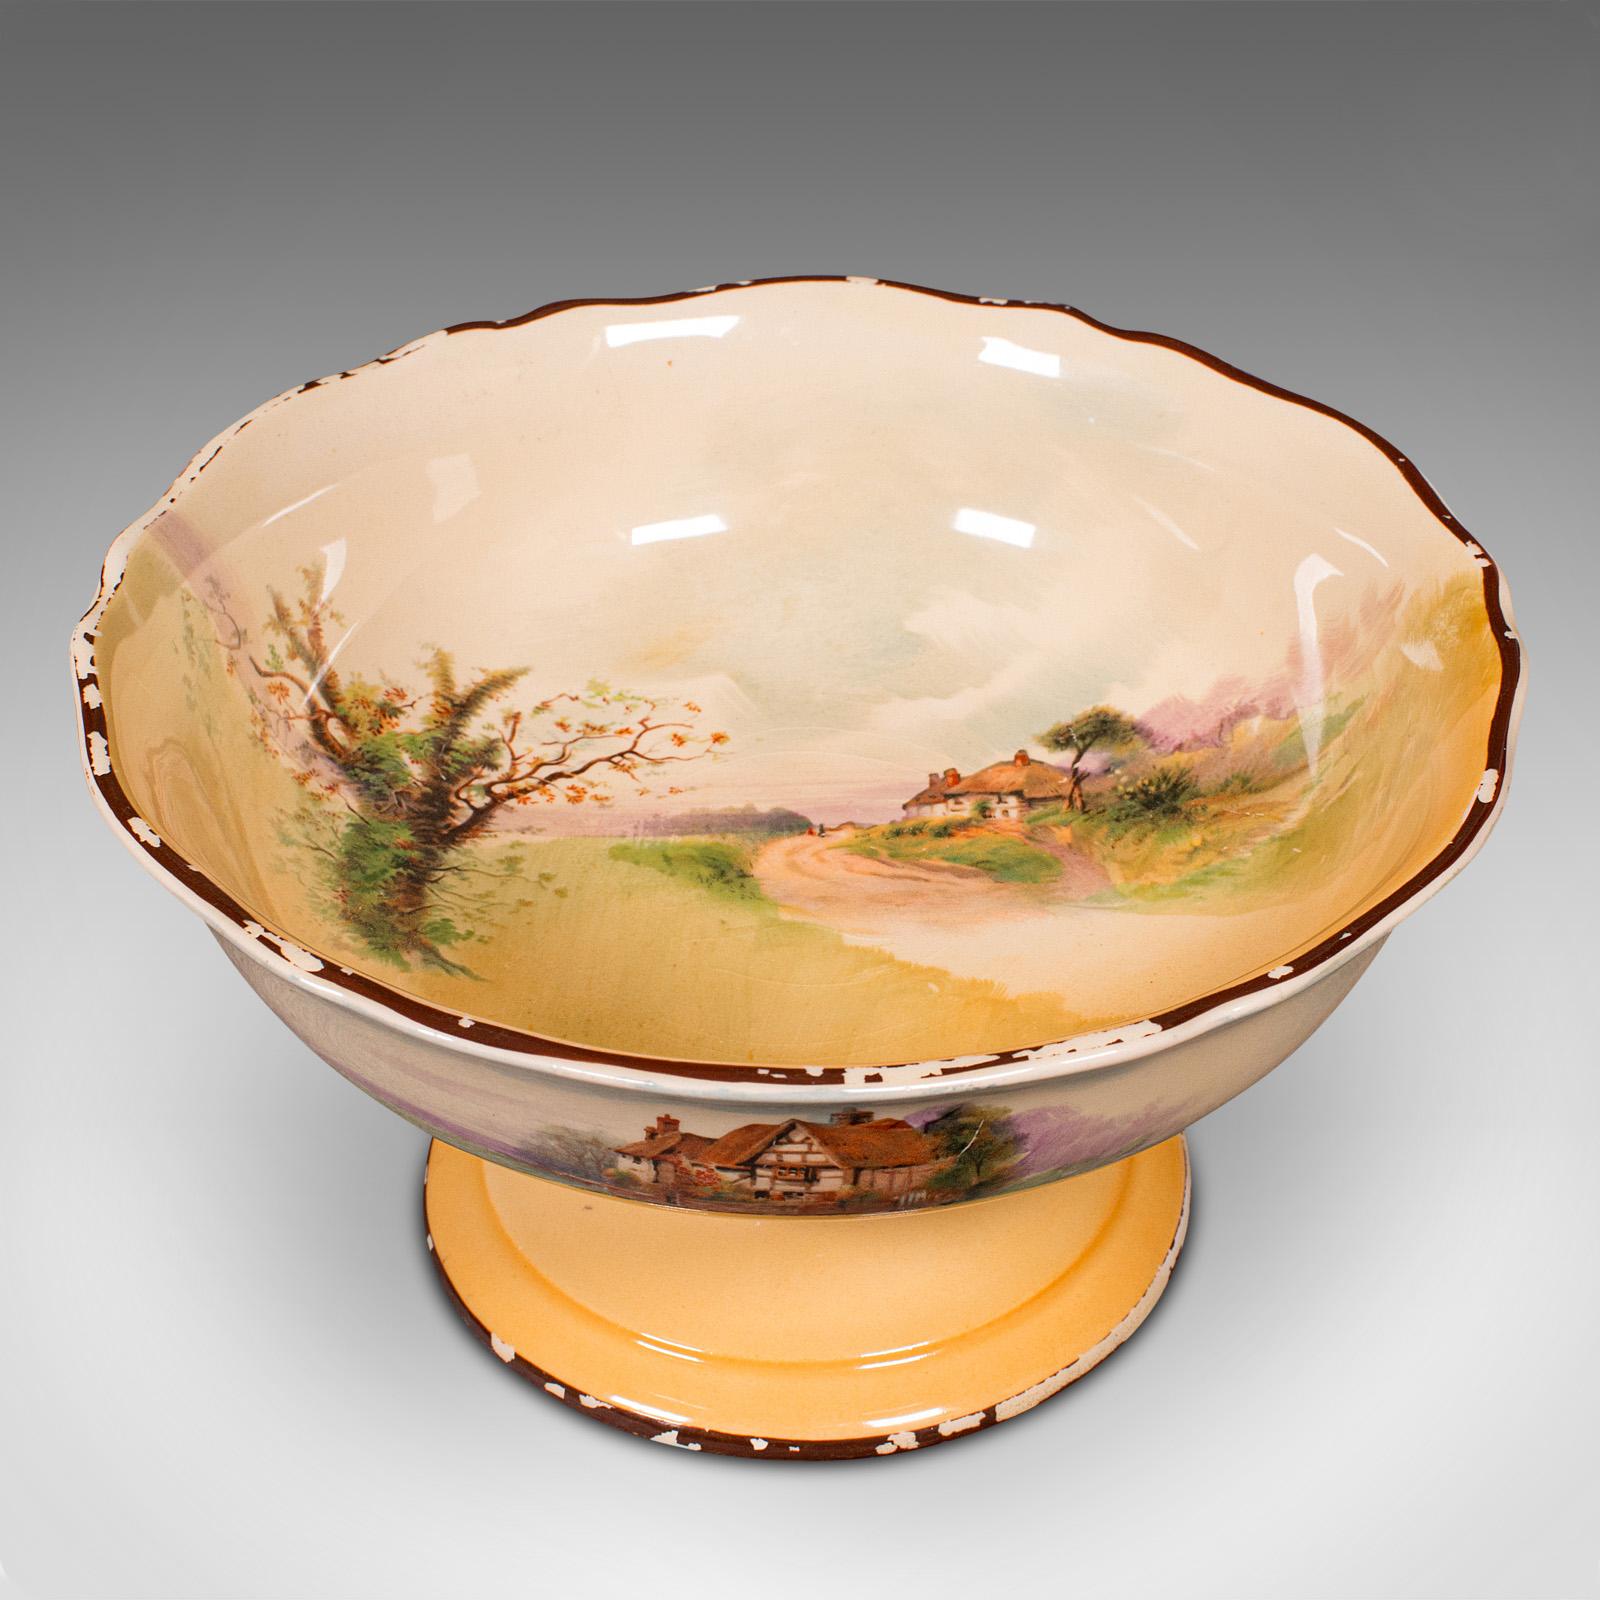 This is a vintage decorative footed bowl. An English, ceramic serving dish, dating to the early 20th century, circa 1930.

Delightful landscape scenes with traditional English country side appeal
Displays a desirable aged patina in good original